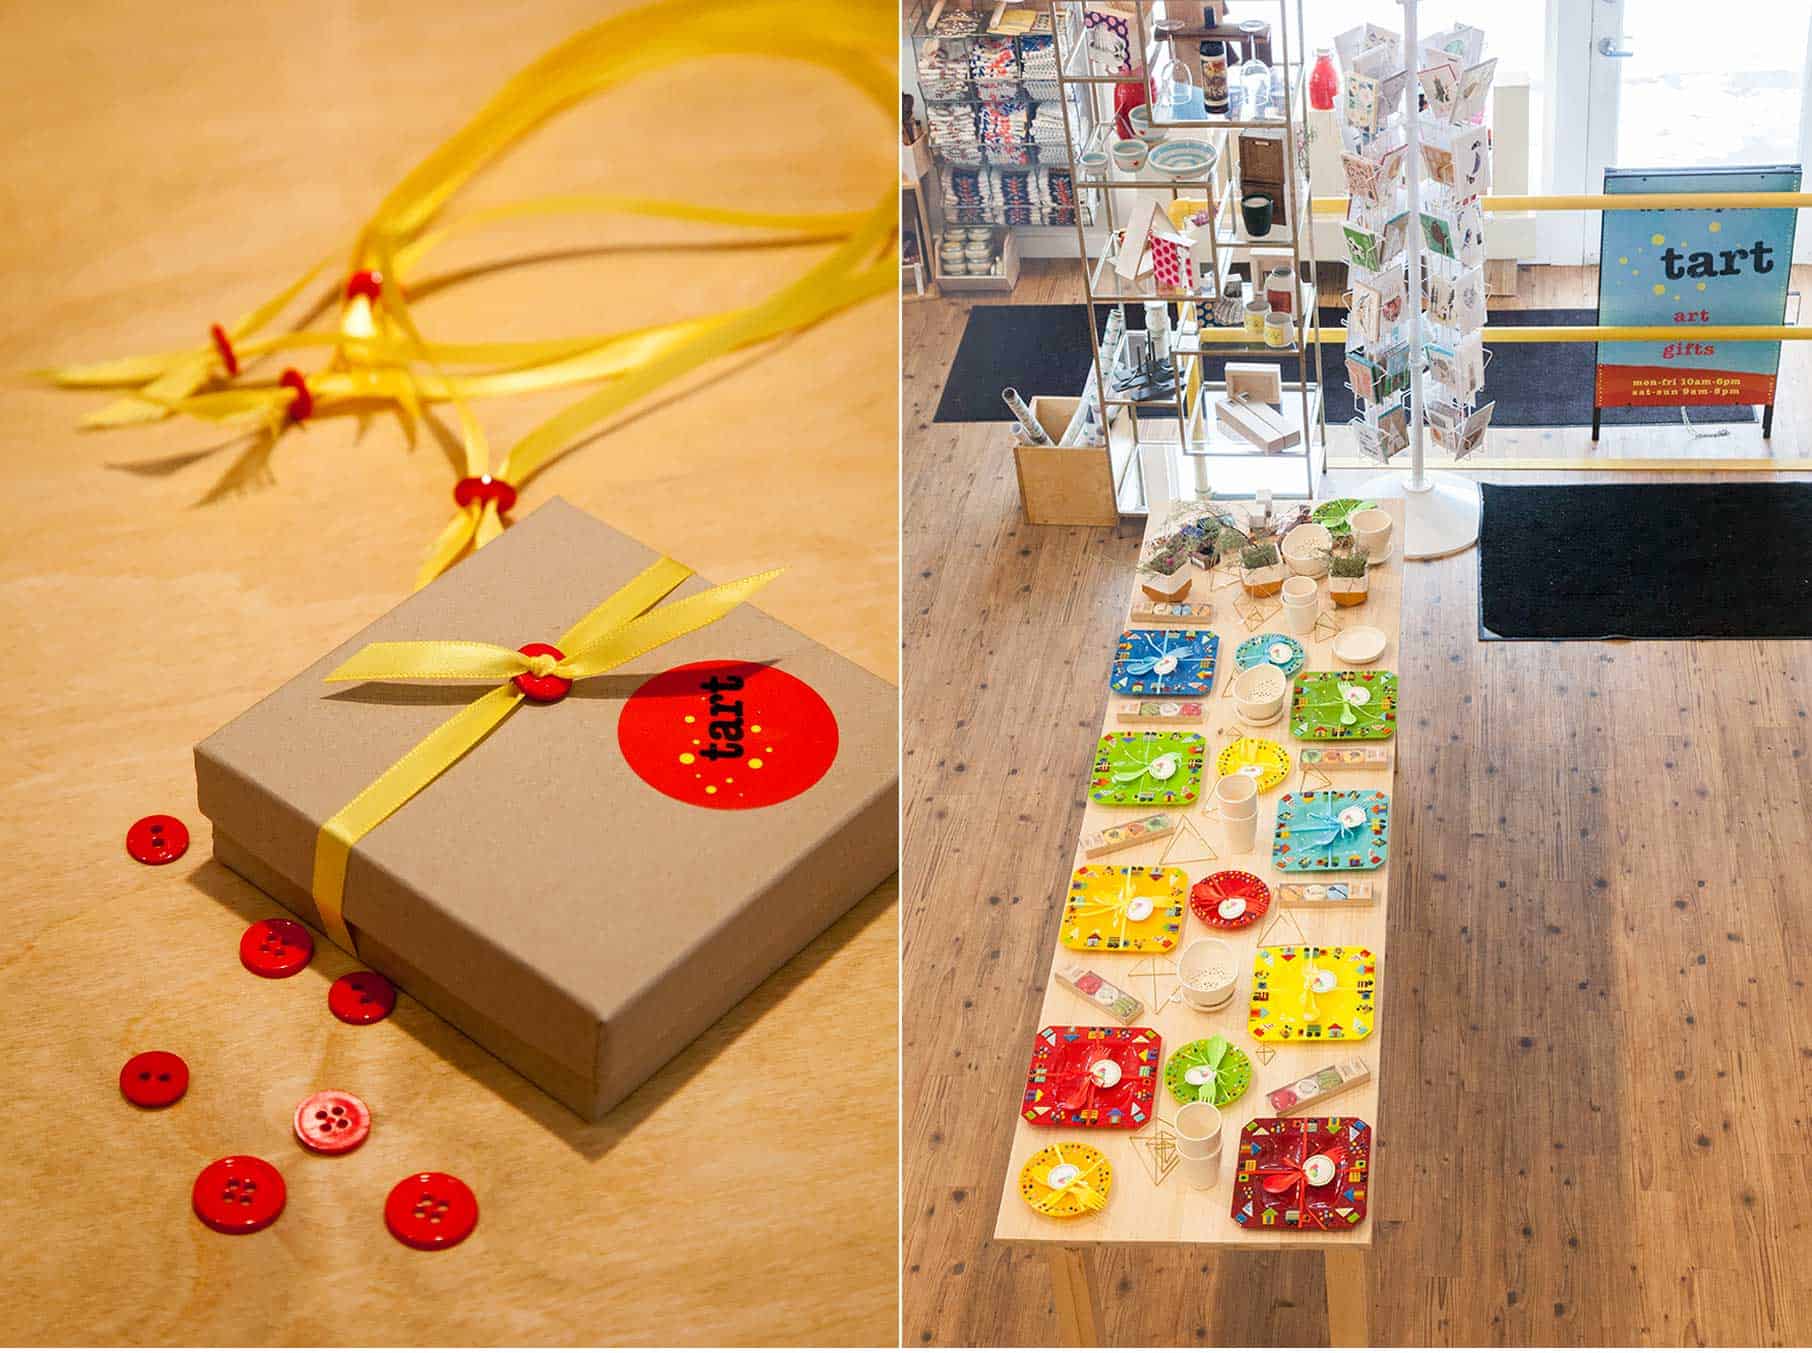 Left: Tart isn't Tart without their signature button closure gift box. Right: A bird's eye view of fused glass plates made by Serena's business partner's mother. 